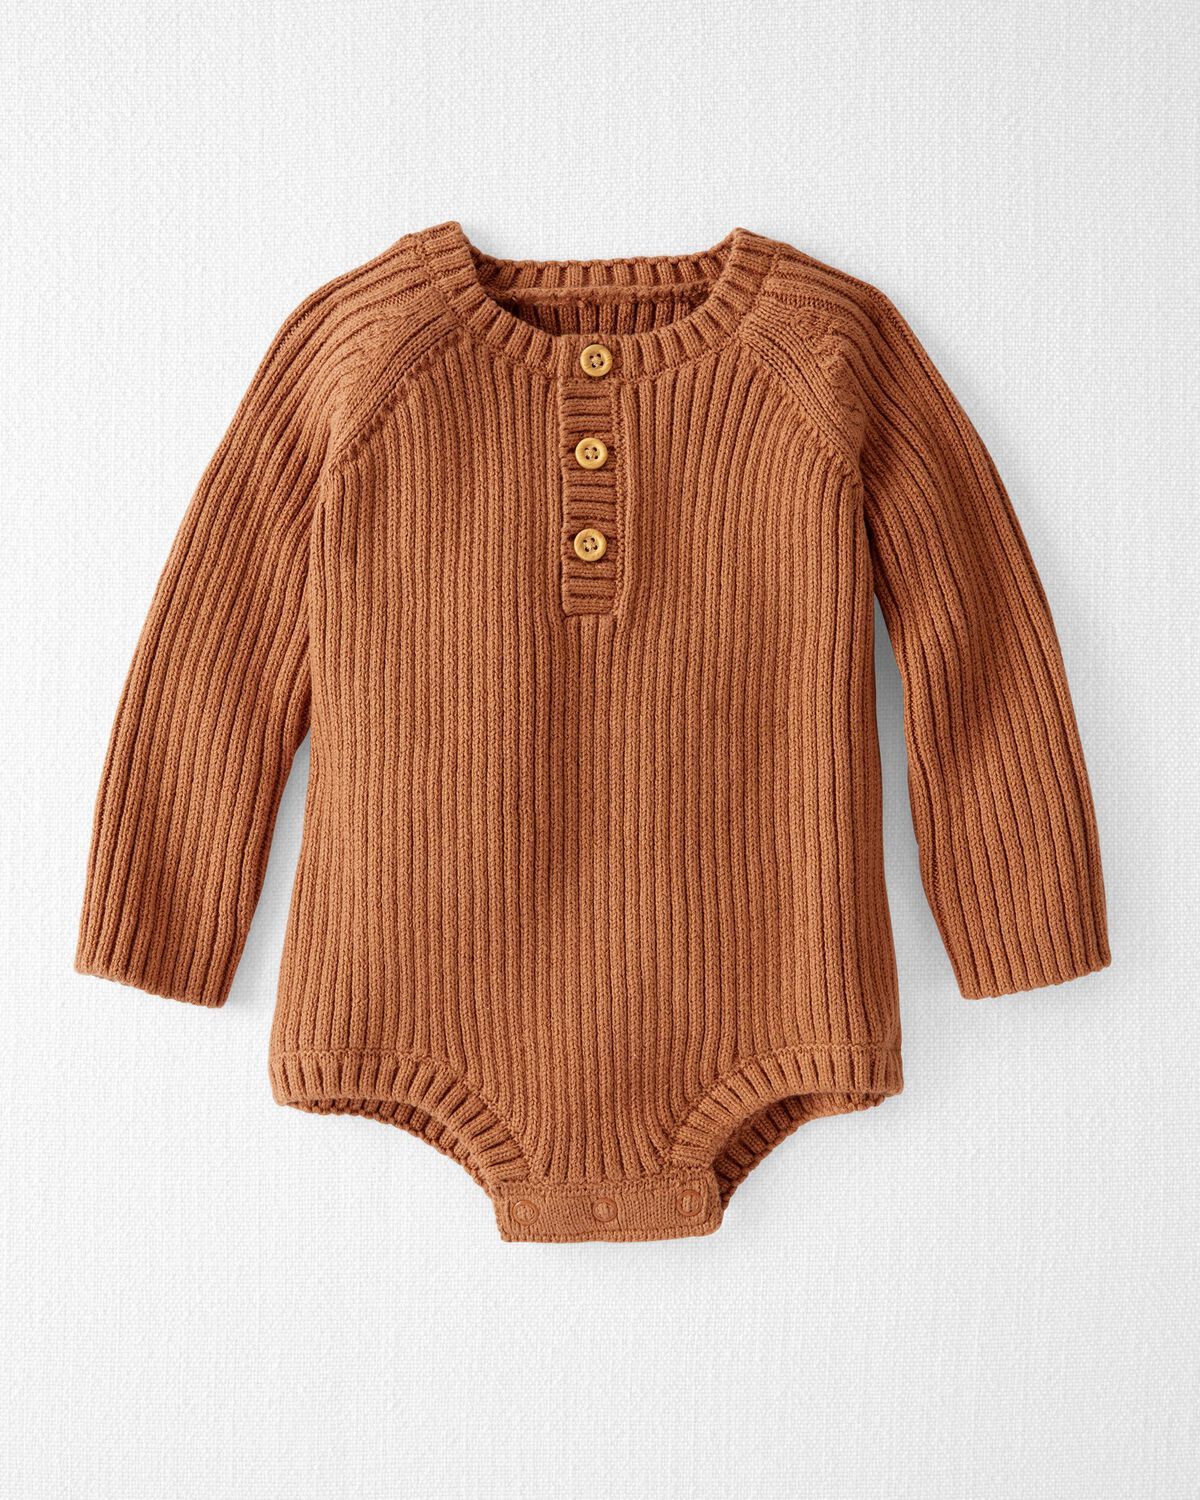 Tiger Eye Baby Organic Cotton Sweater Knit Bubble | carters.com | Carter's